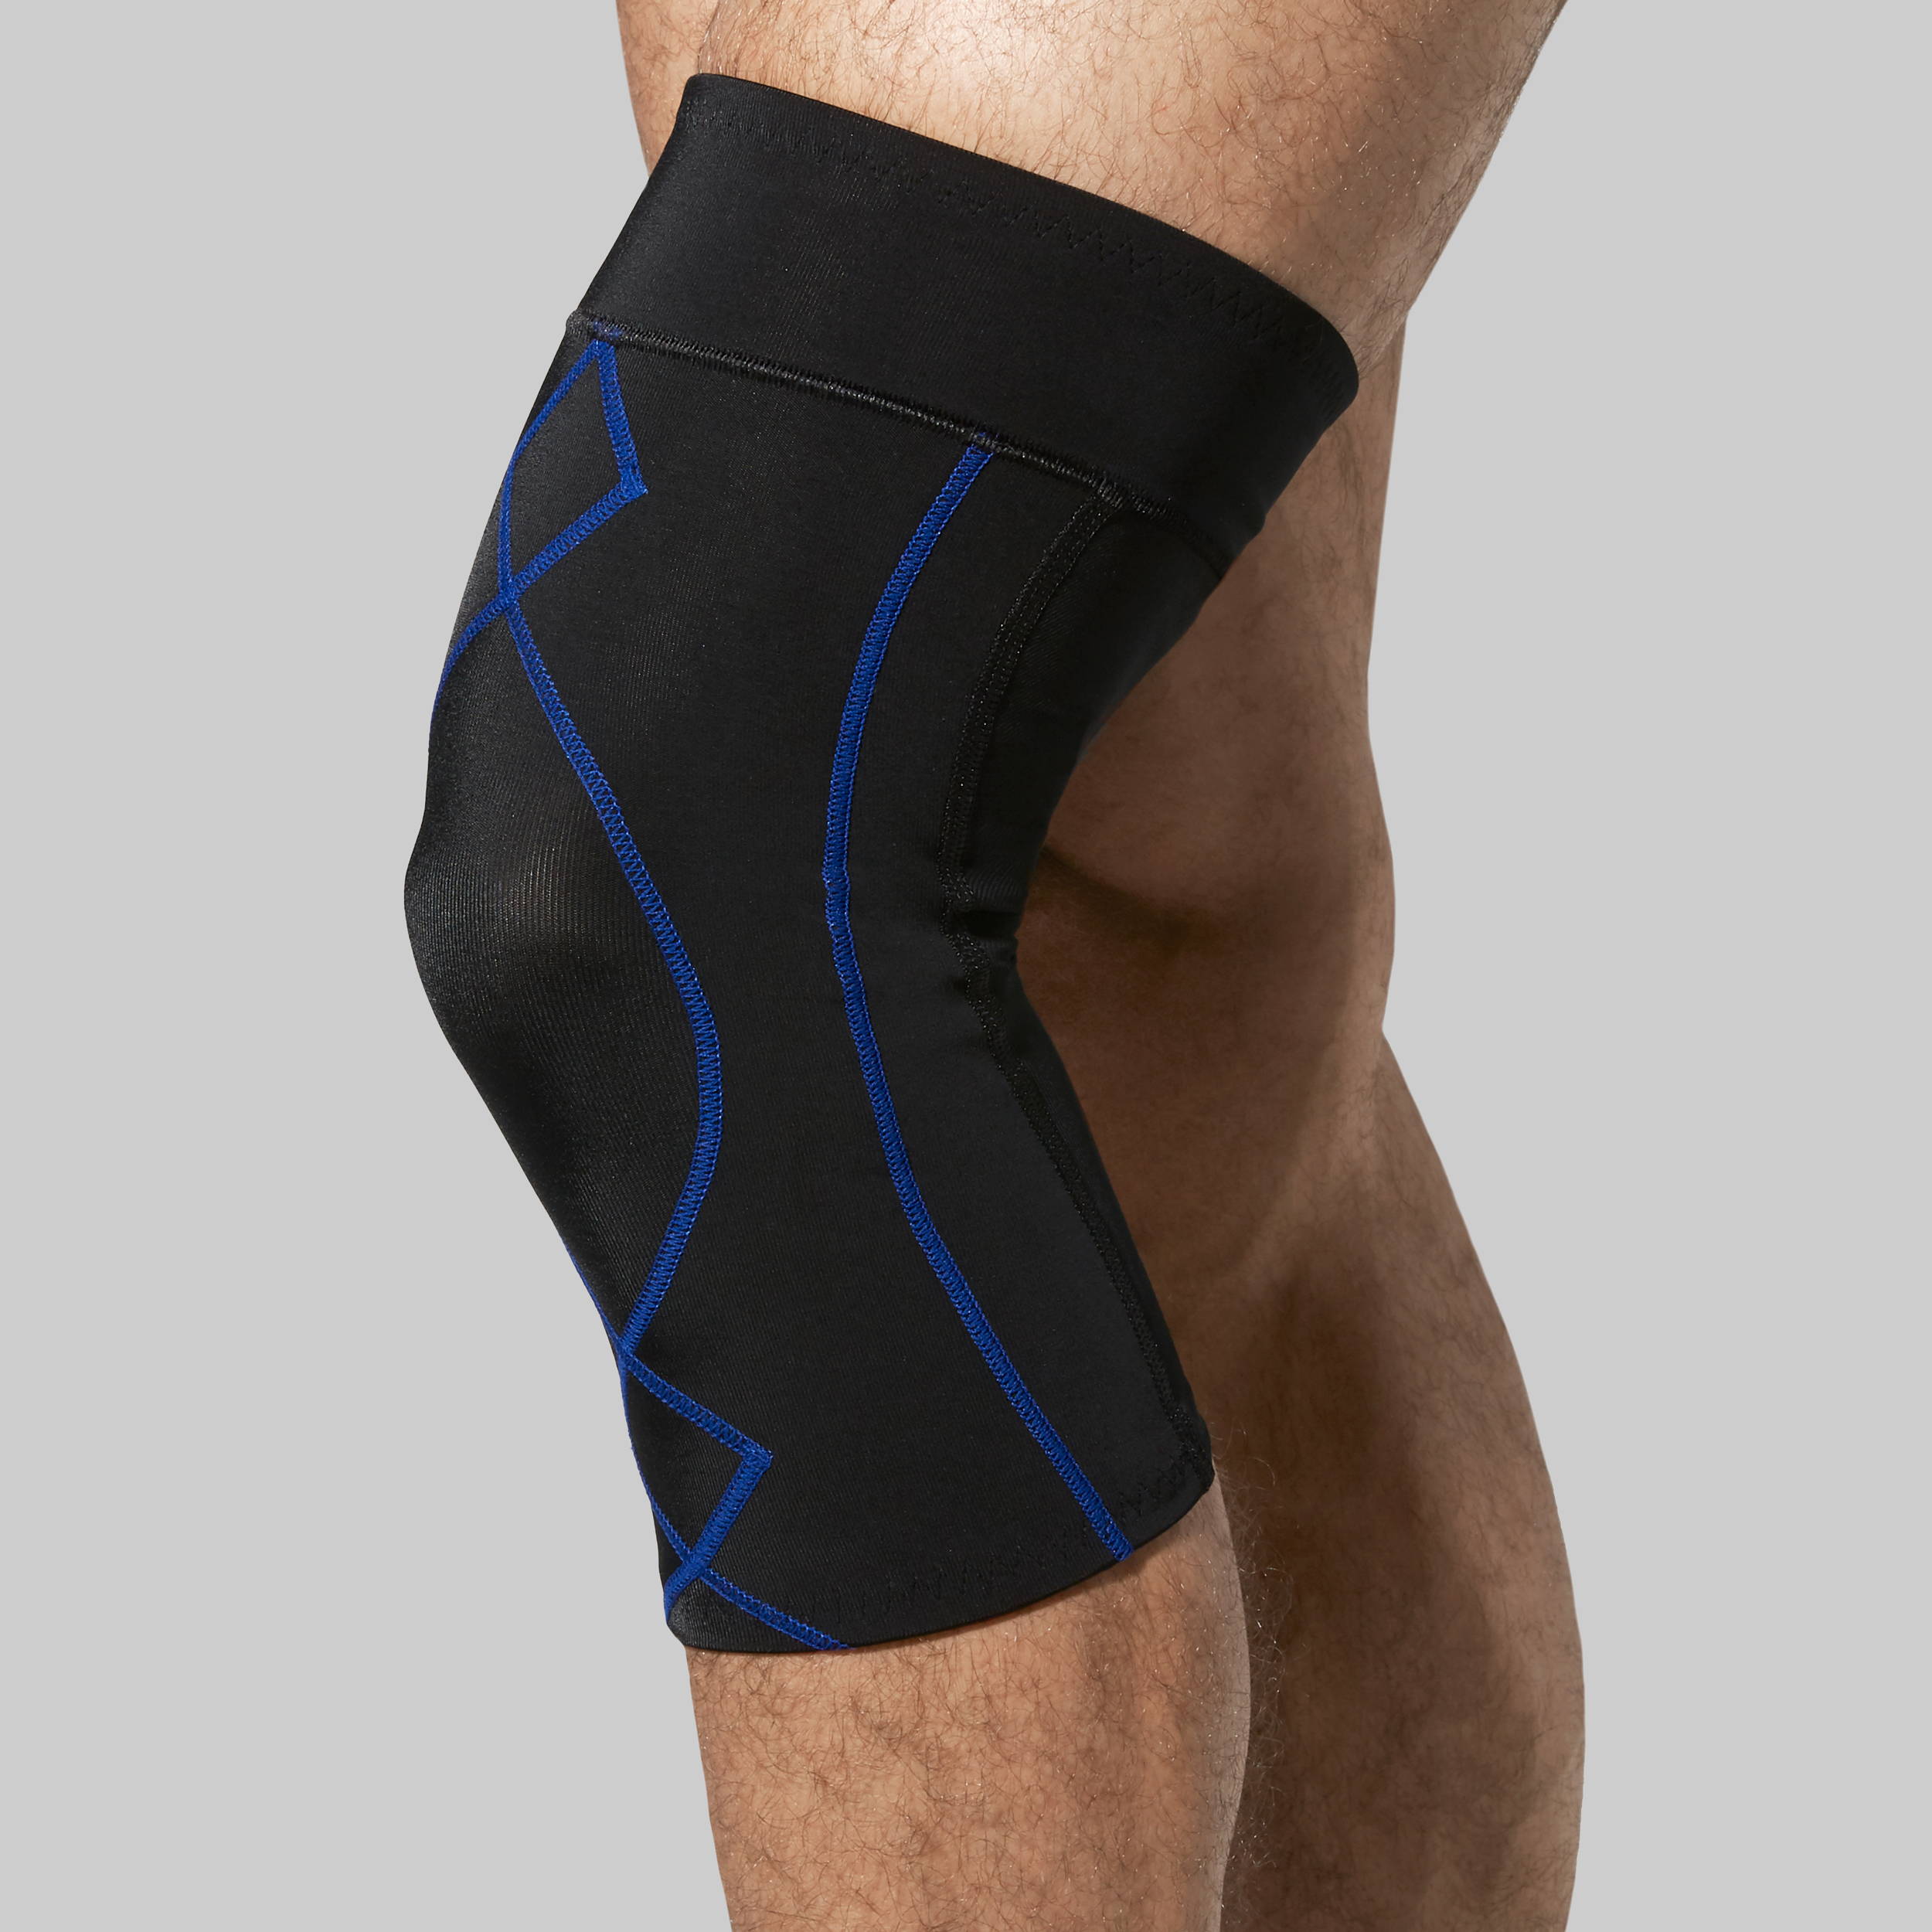 CW-X Compression Sleeves for Men